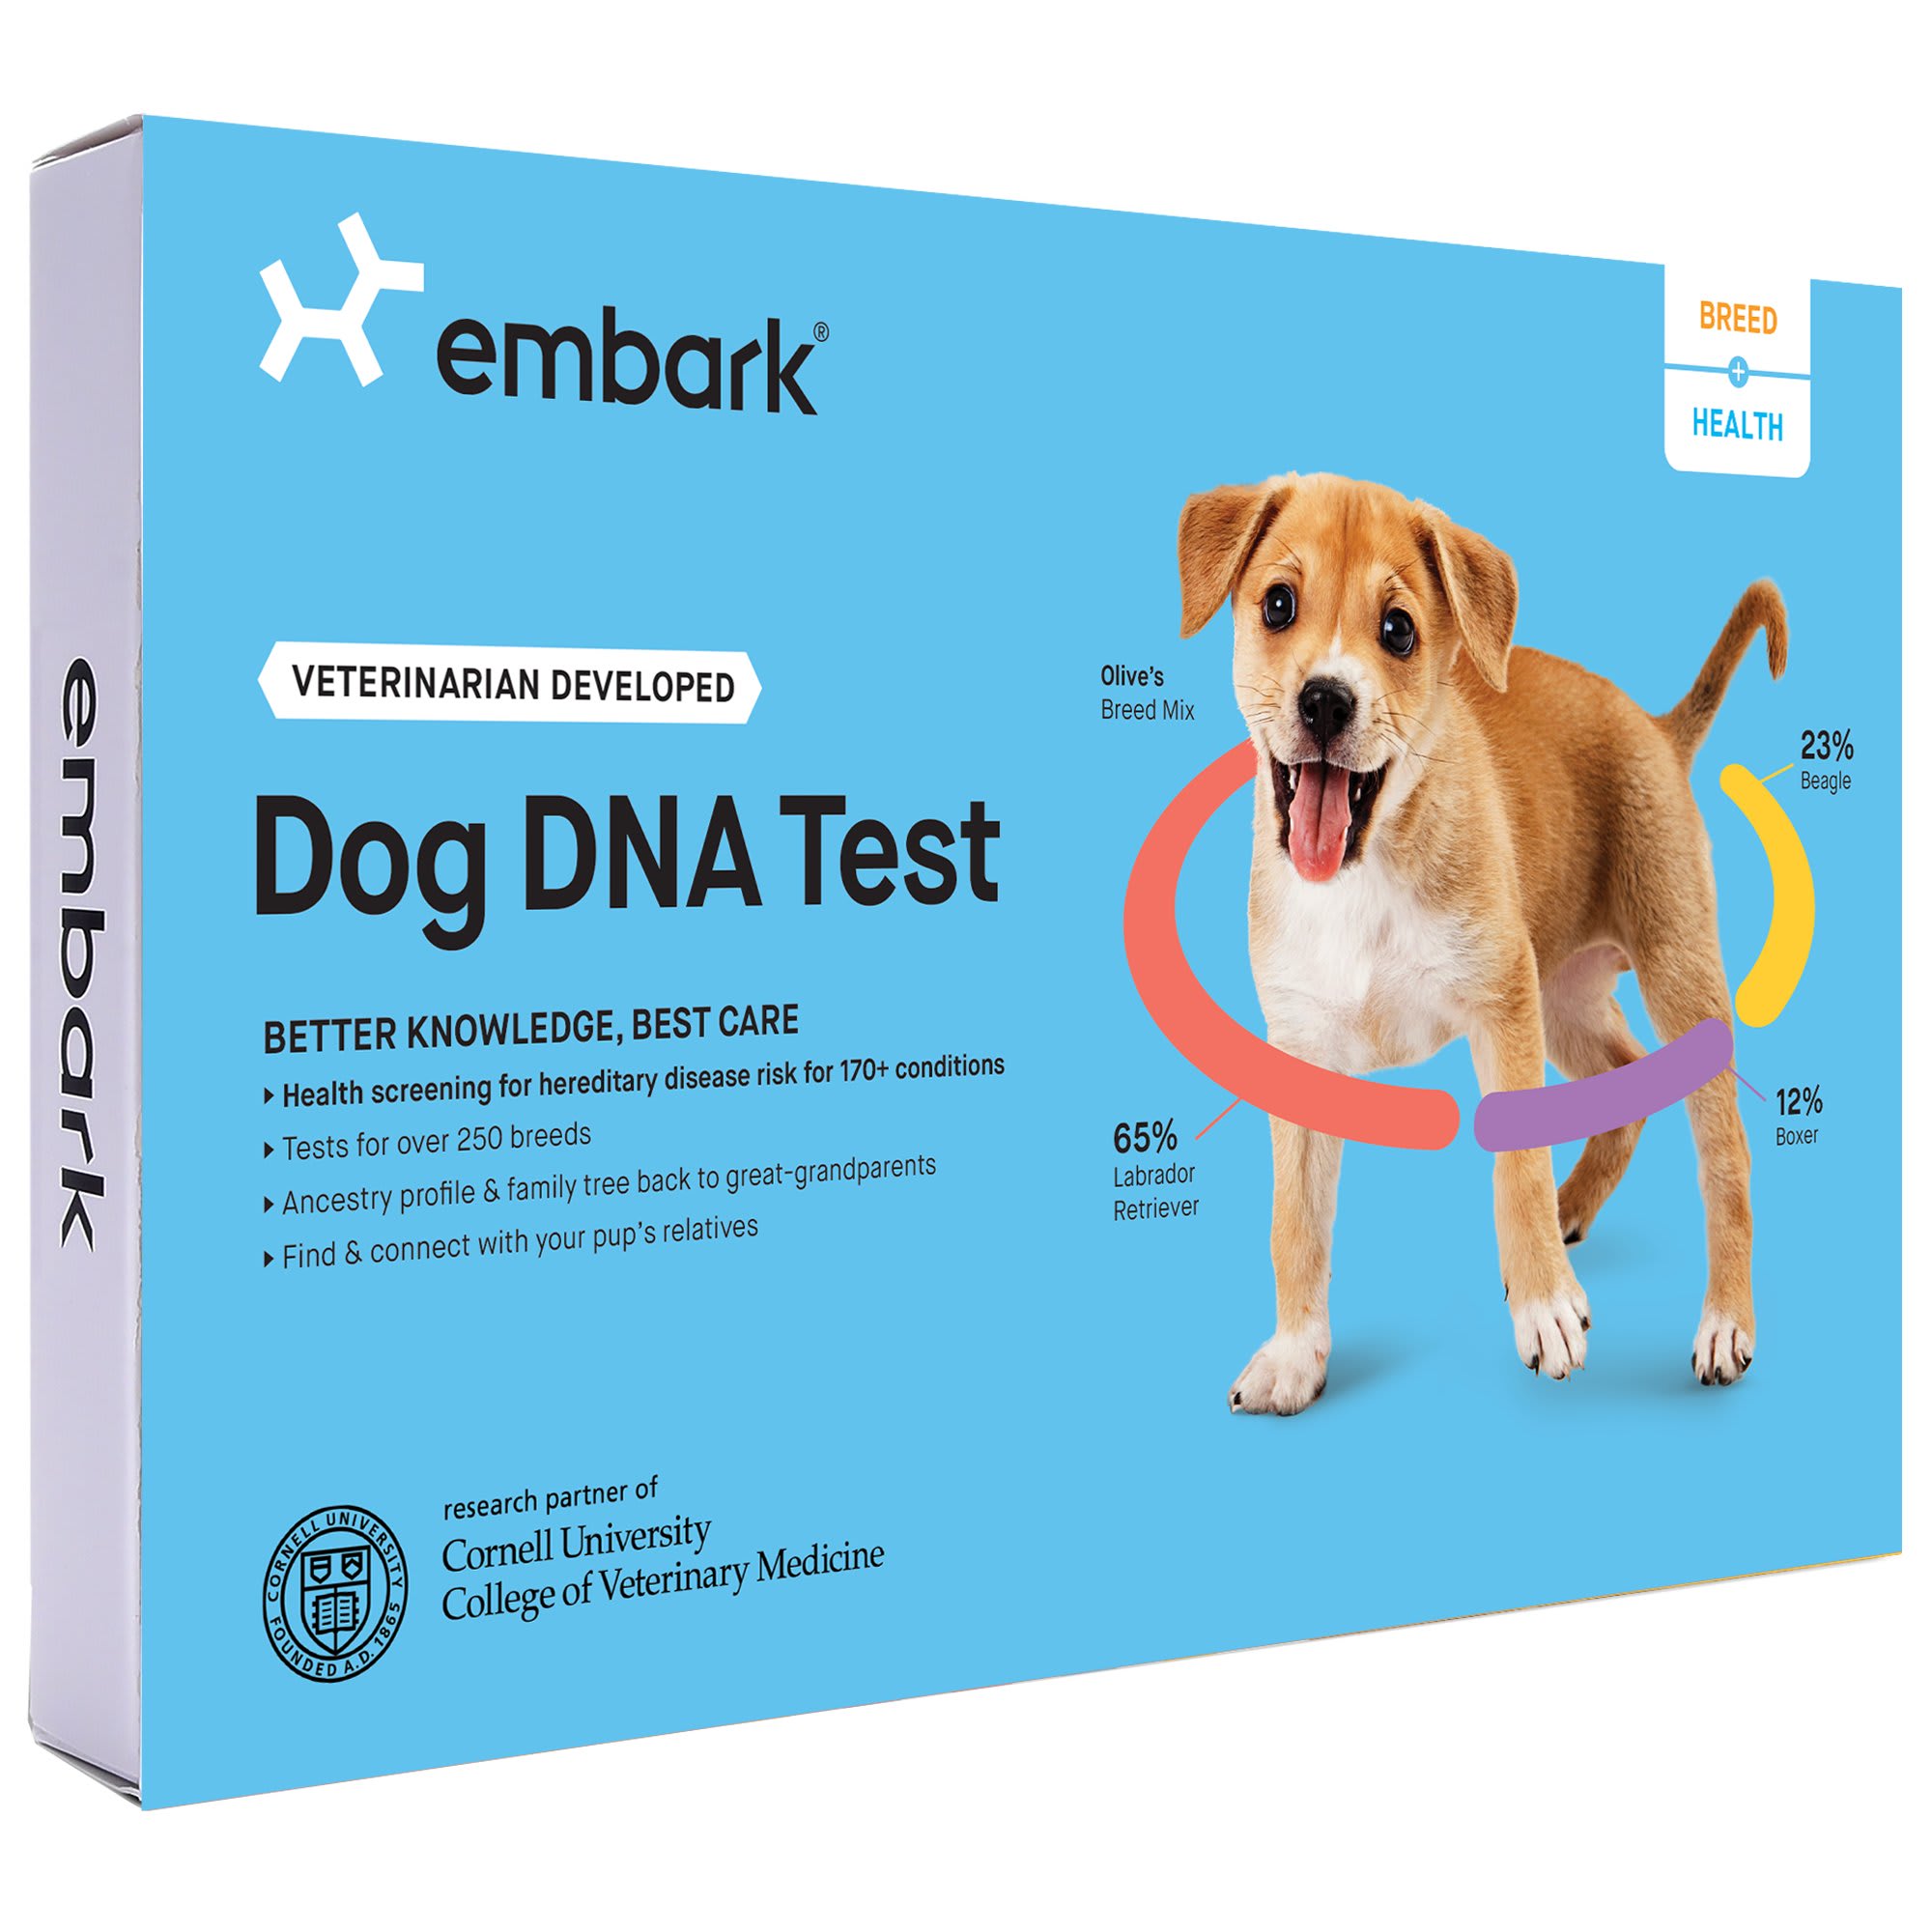 dna for a dog